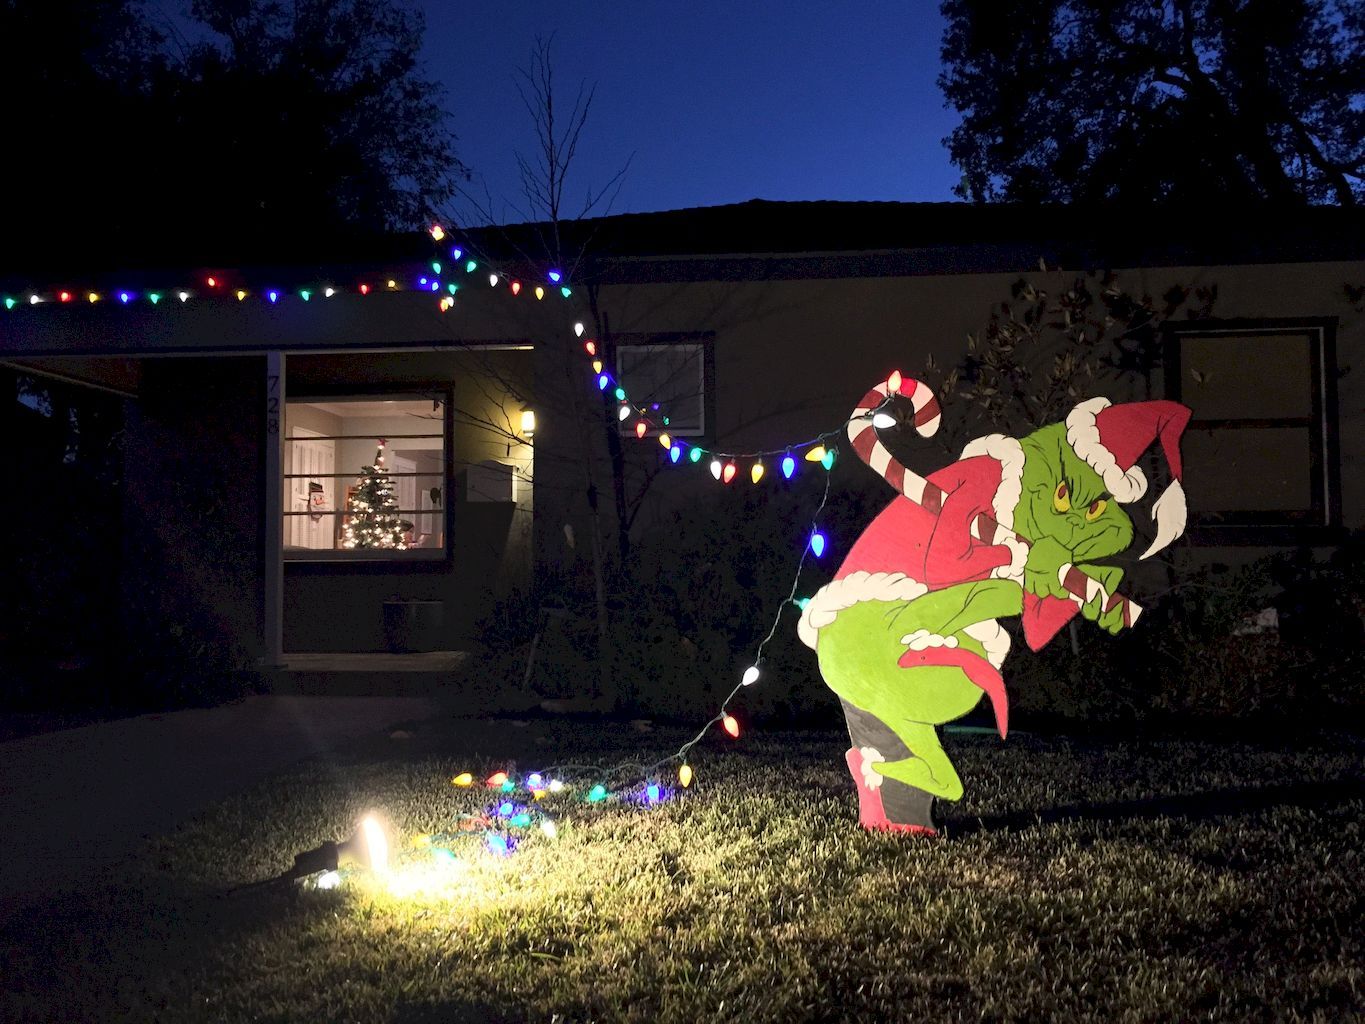 How The Grinch Stole Christmas Outdoor Decorations